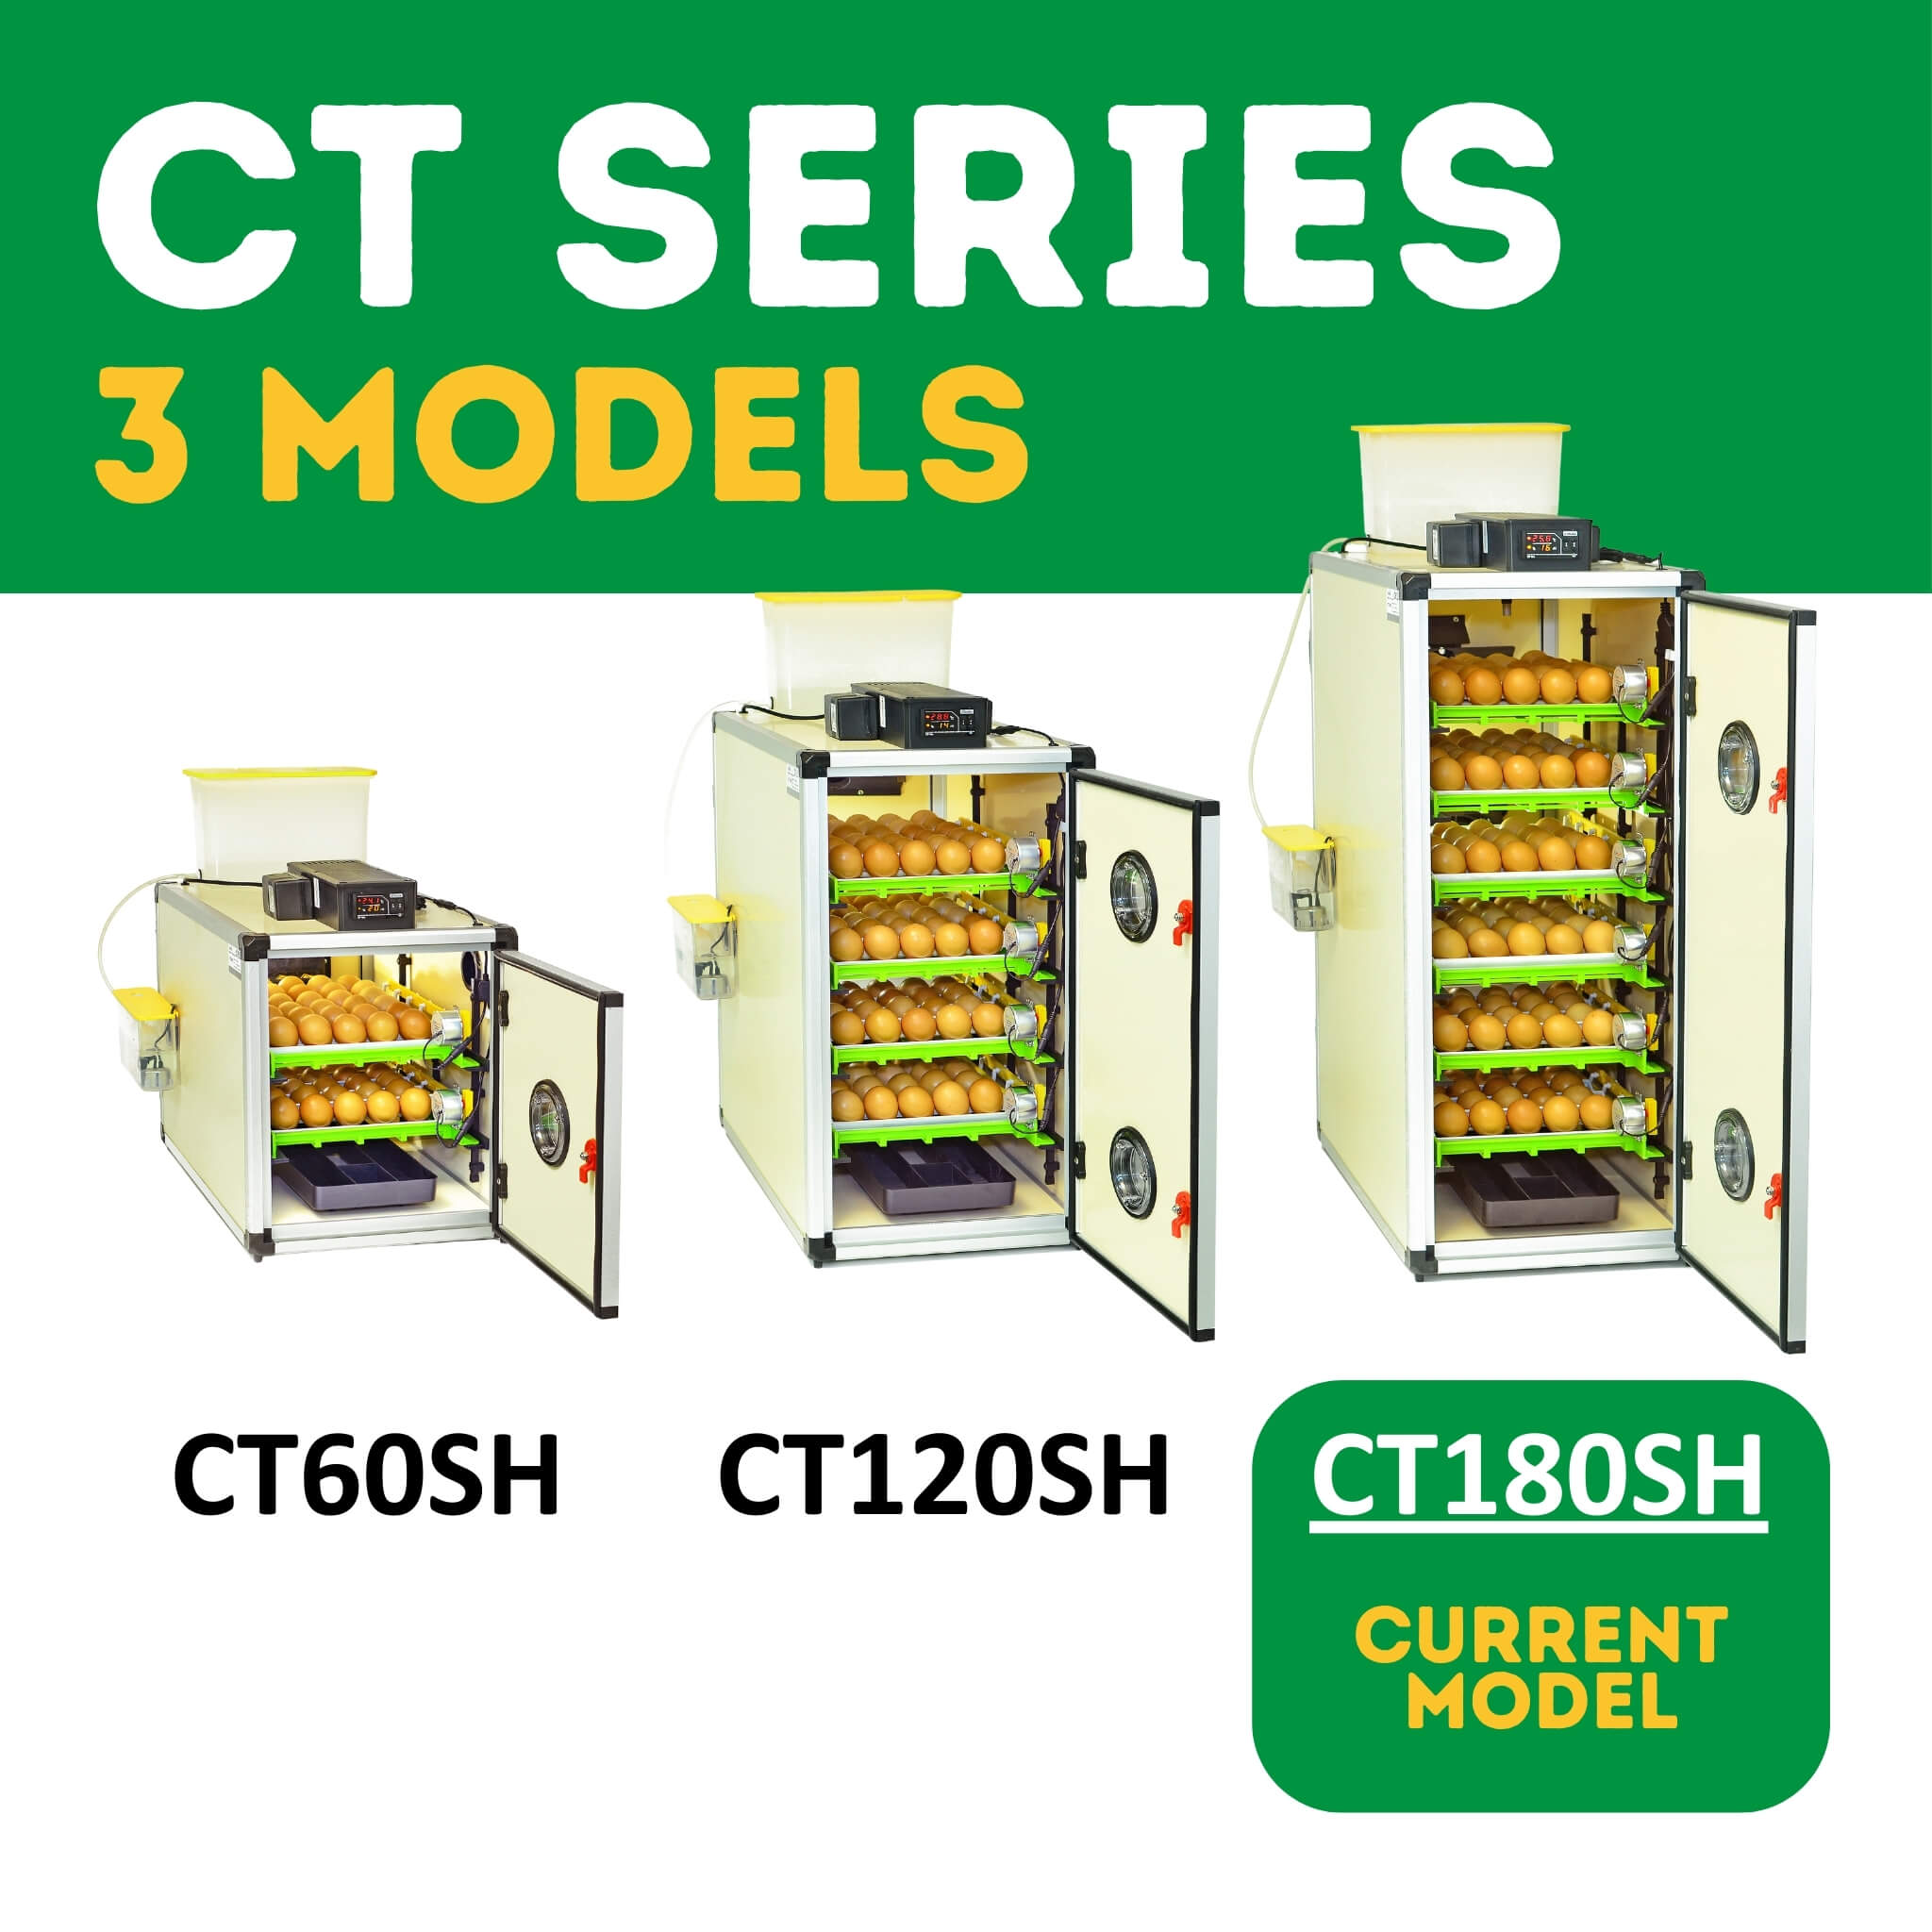 Hatching Time Cimuka CT series Incubator. Image text reads CT series 3 models. Image shows 3 Cimuka CT incubators from left to right they are CT60SH, CT120SH and CT180SH (current model). All incubators have door open, full setting trays of brown chicken eggs. Digital controls can be seen on top of incubators in front of water reservoir tank connected to Humisonic Humidifier.